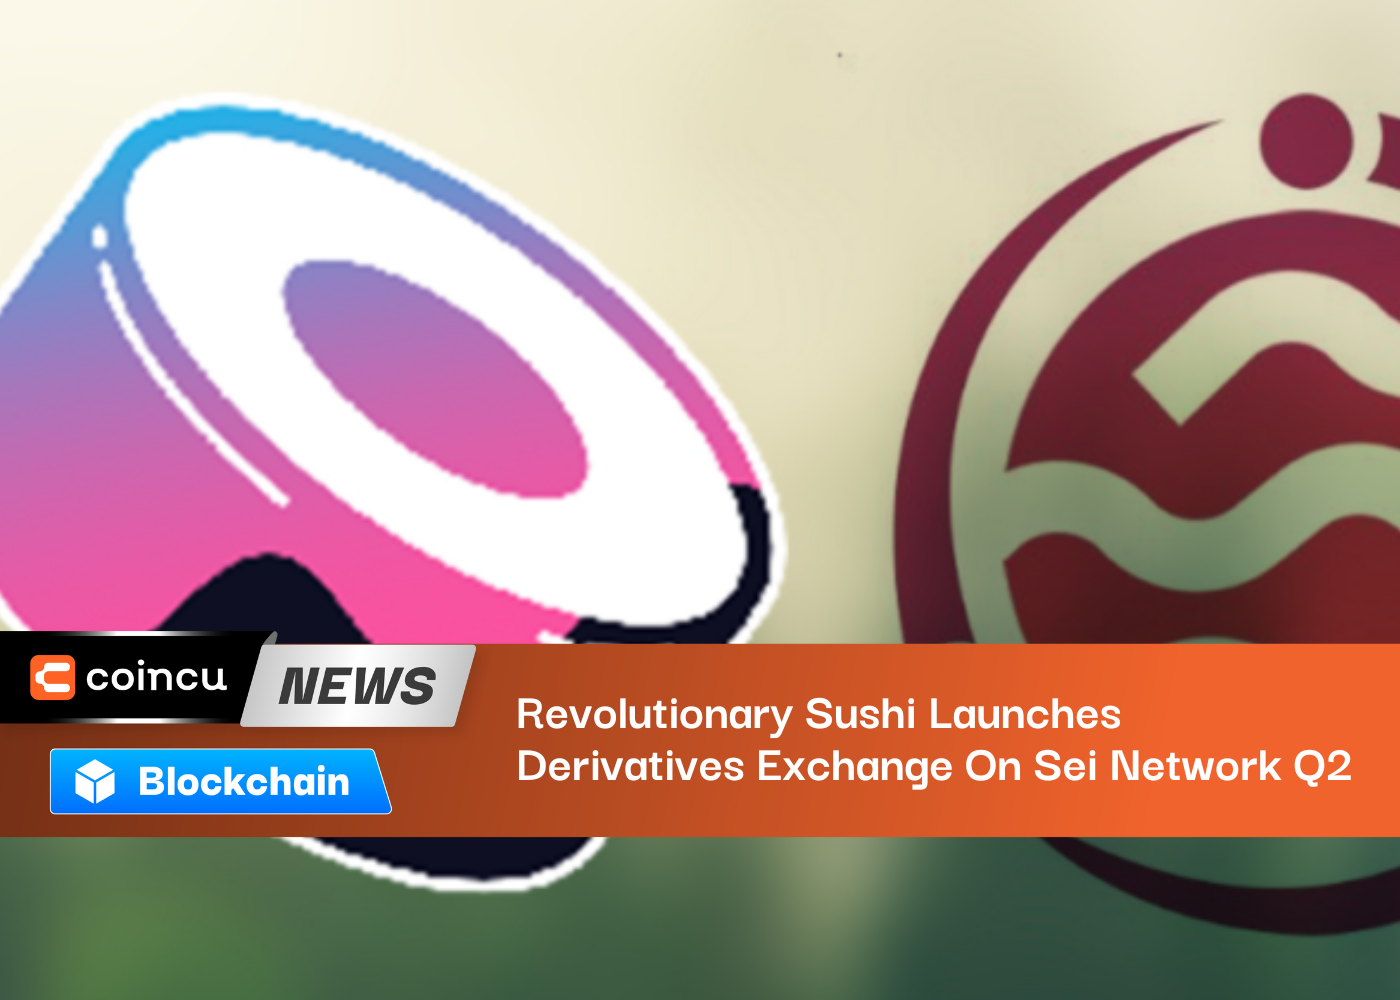 Revolutionary Sushi Launches Derivatives Exchange On Sei Network Q2